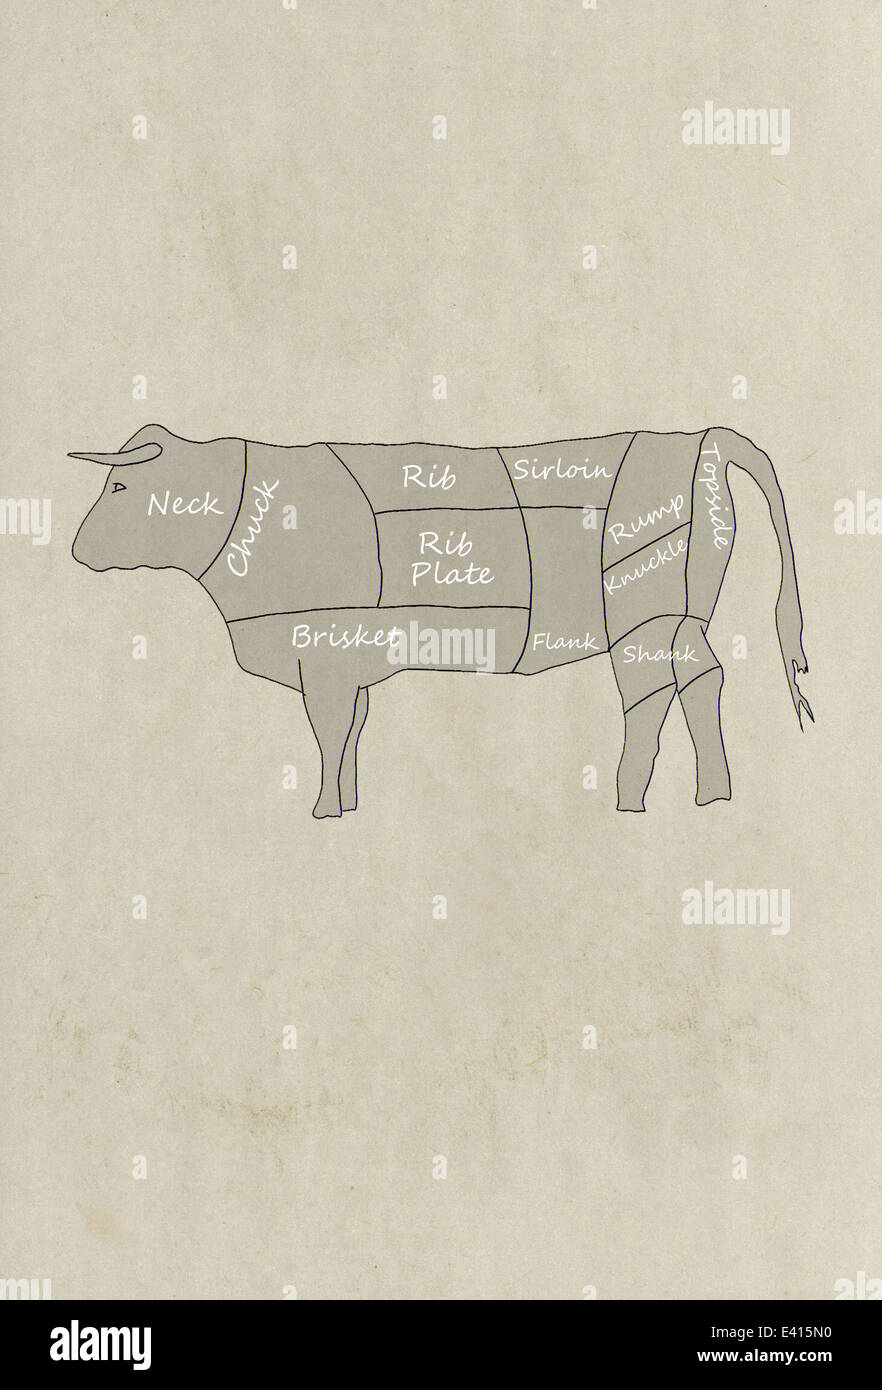 Hand drawn Illustration/ infographic of a cow showing where the various cuts of meat come from on the animal. Stock Photo